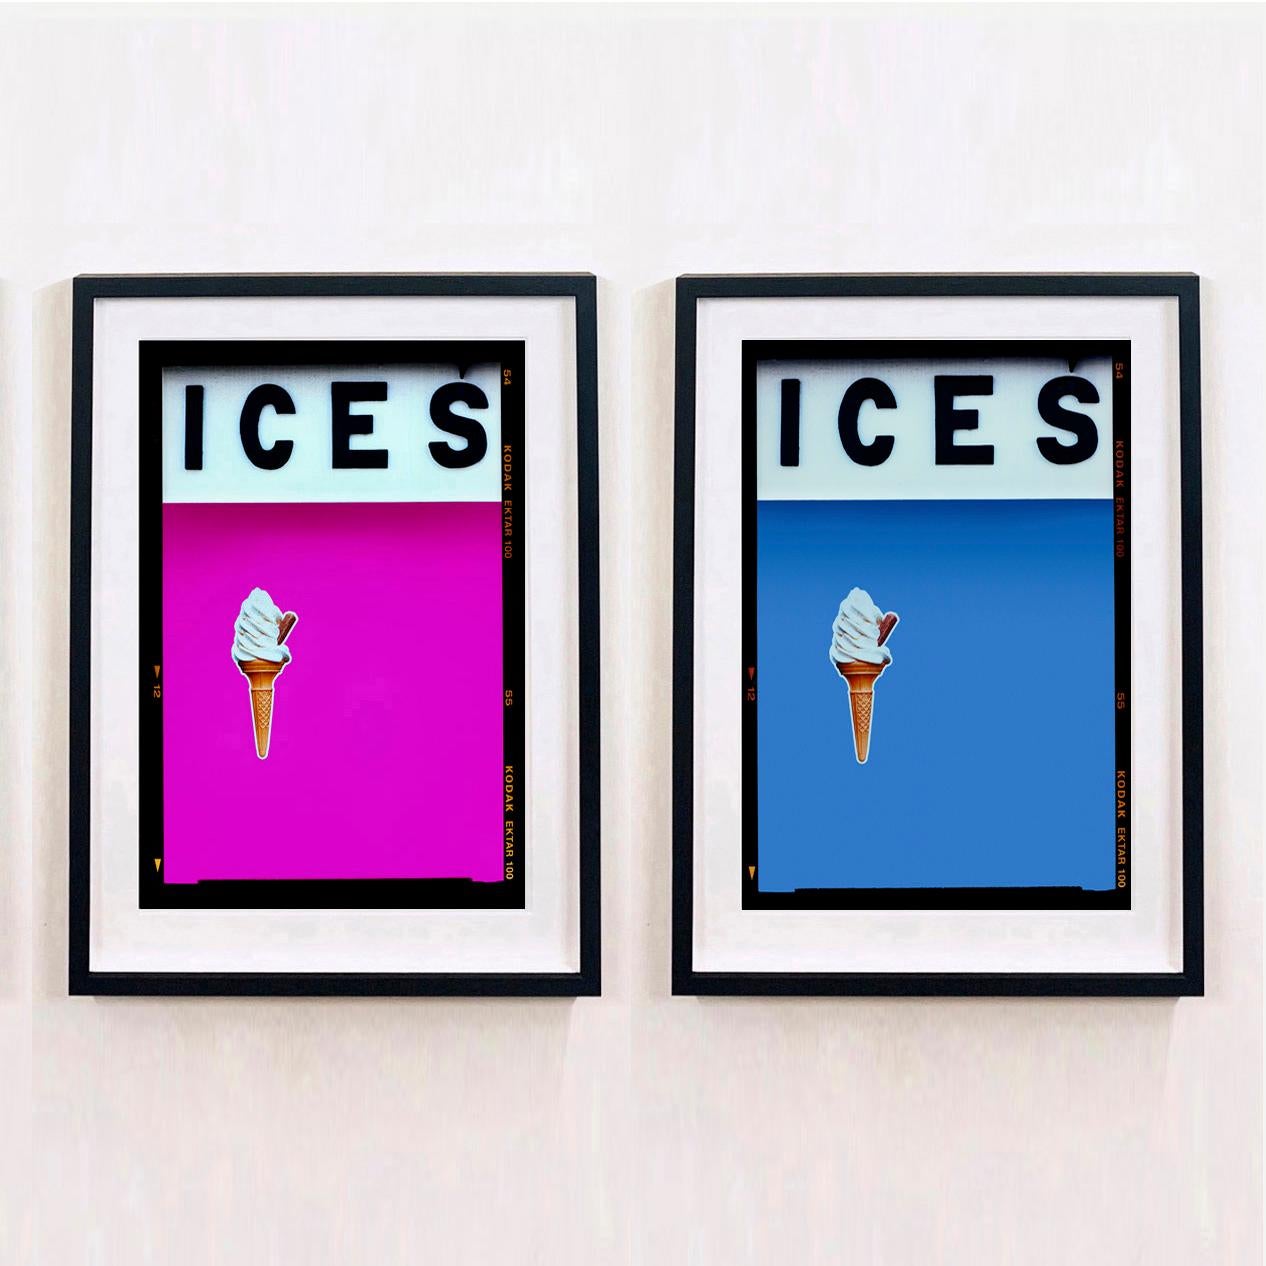 Ices (Baby Blue), Bexhill-on-Sea - British seaside color photography For Sale 2